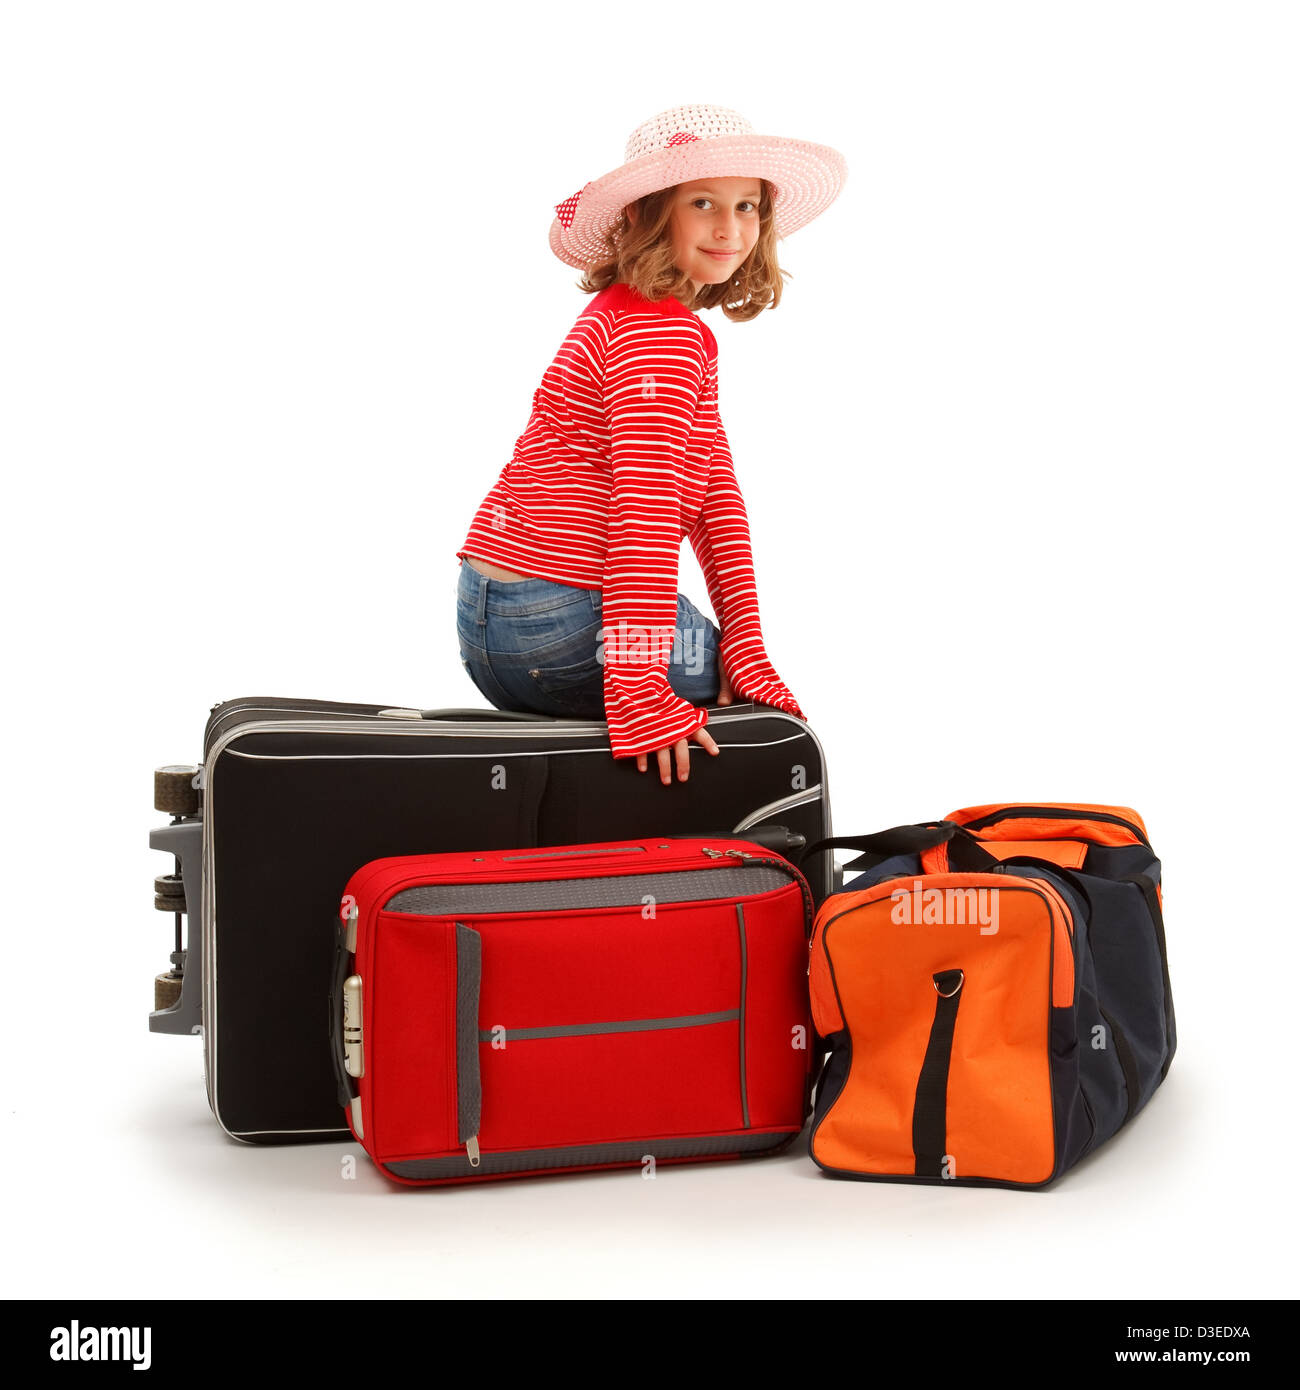 Girl sitting on luggages, ready to trip Stock Photo